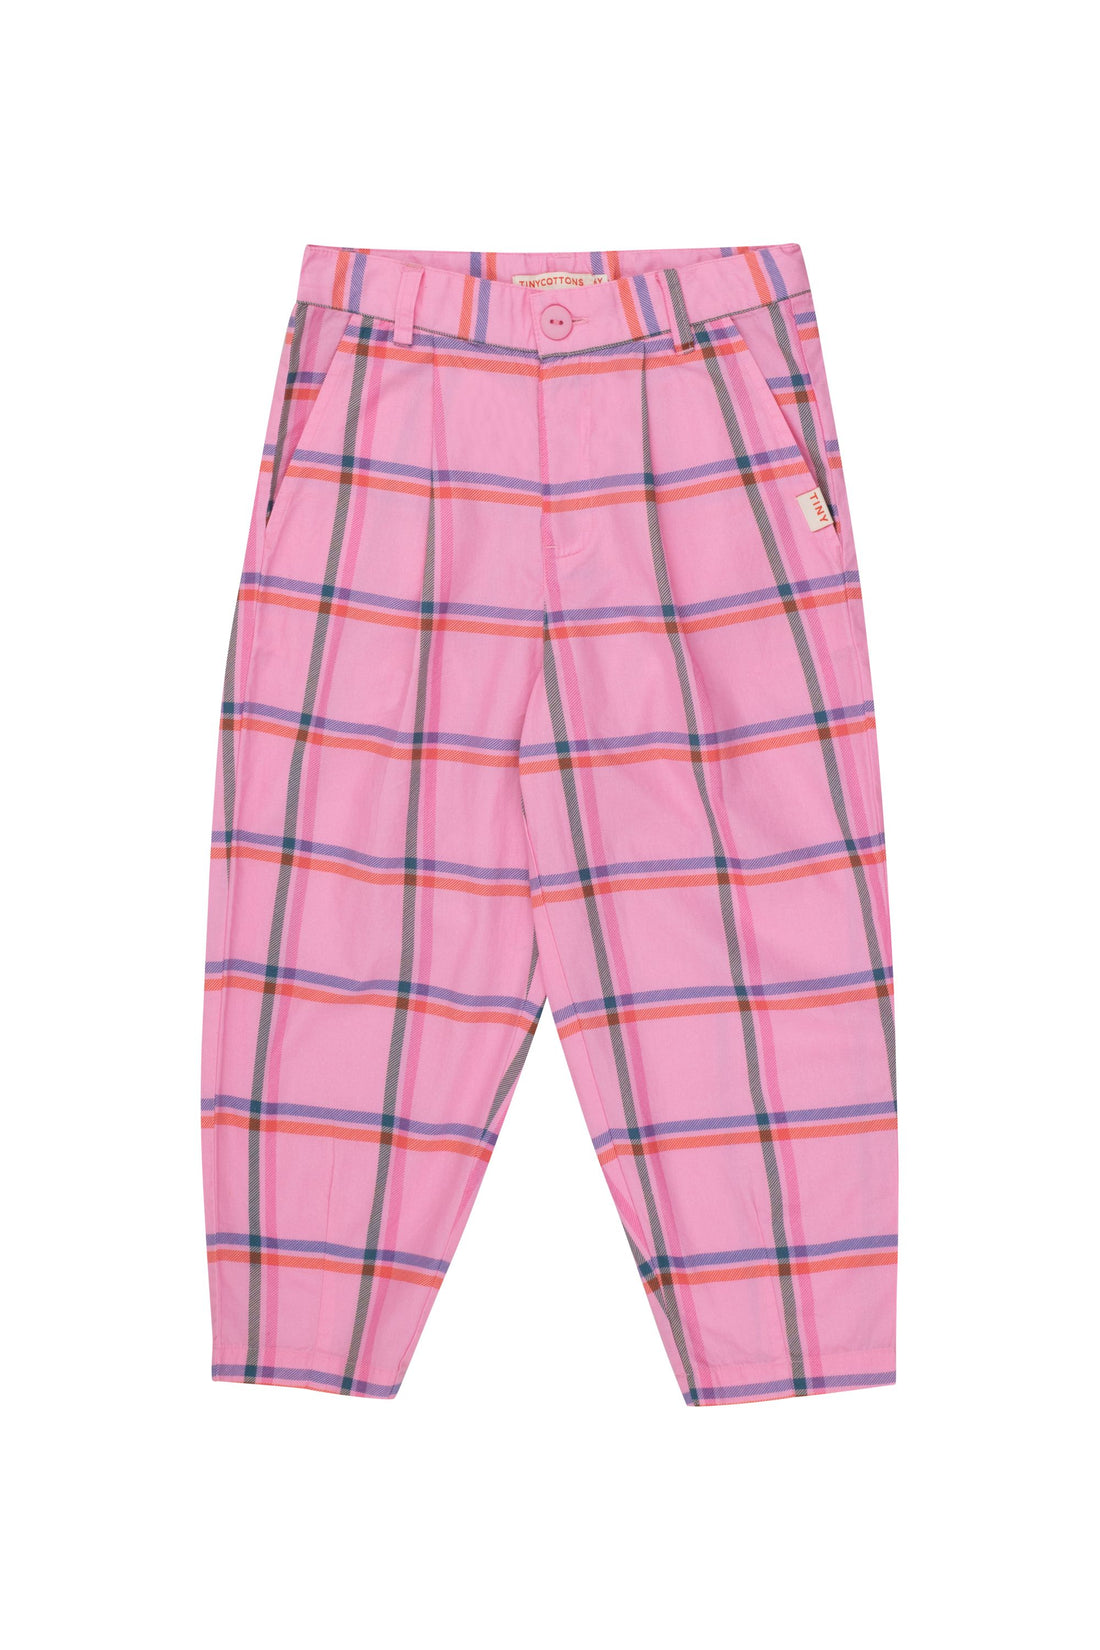 Tiny Cottons - check pleated pants - pink